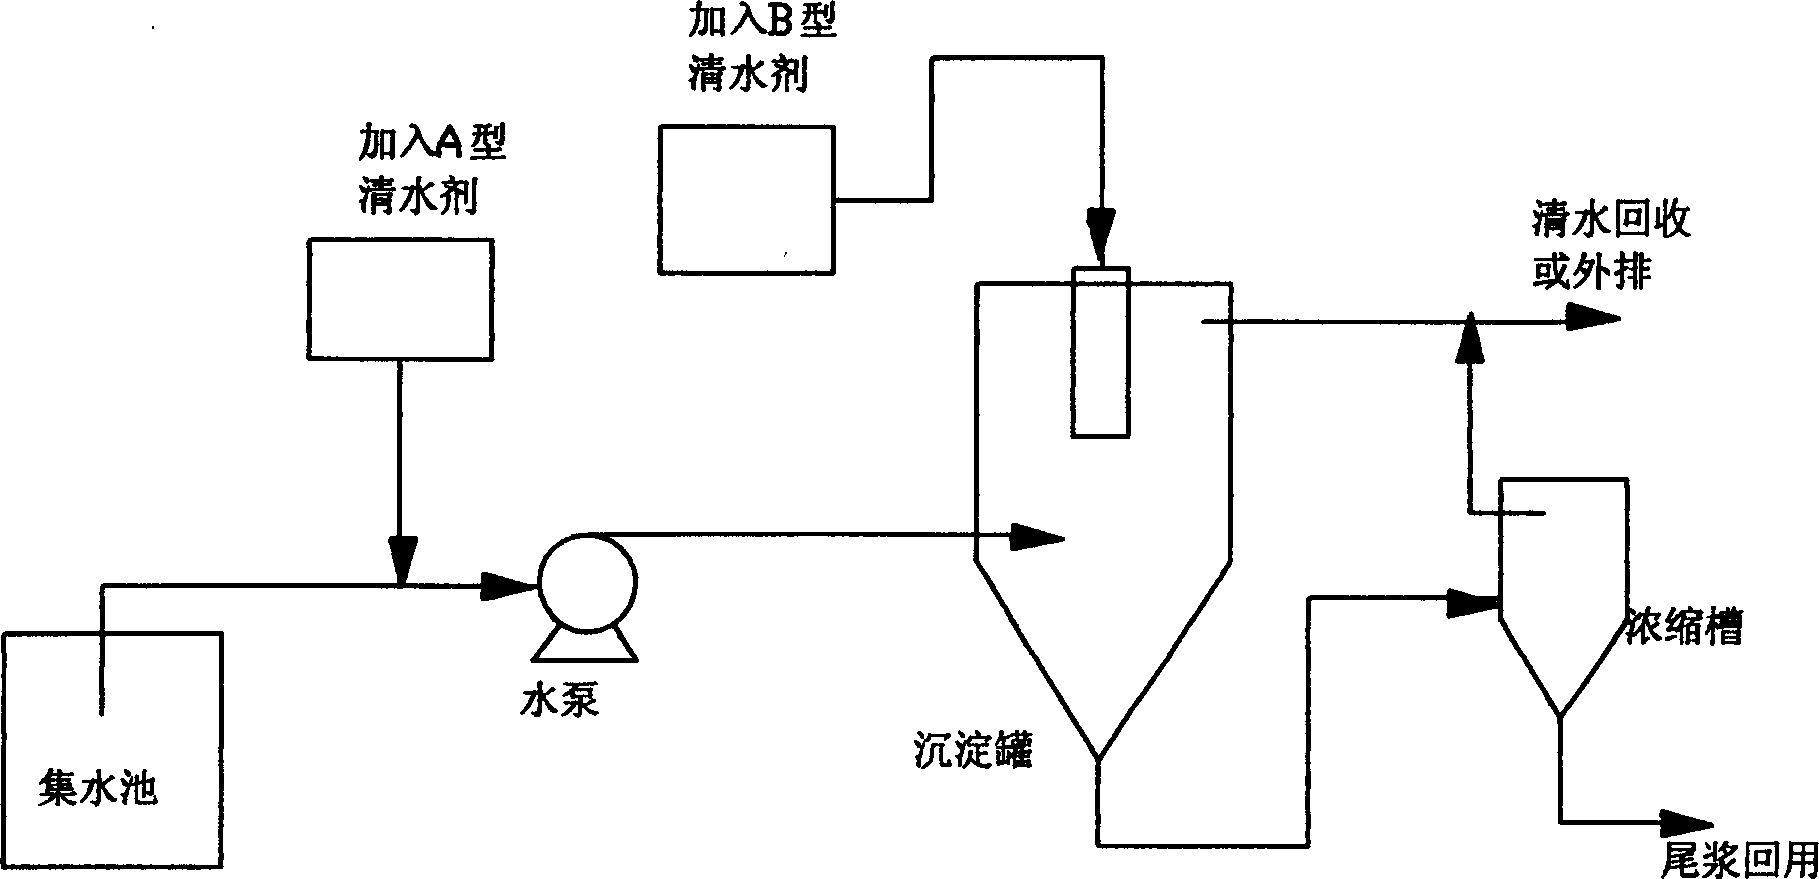 Process for preparing waste water purifying agent